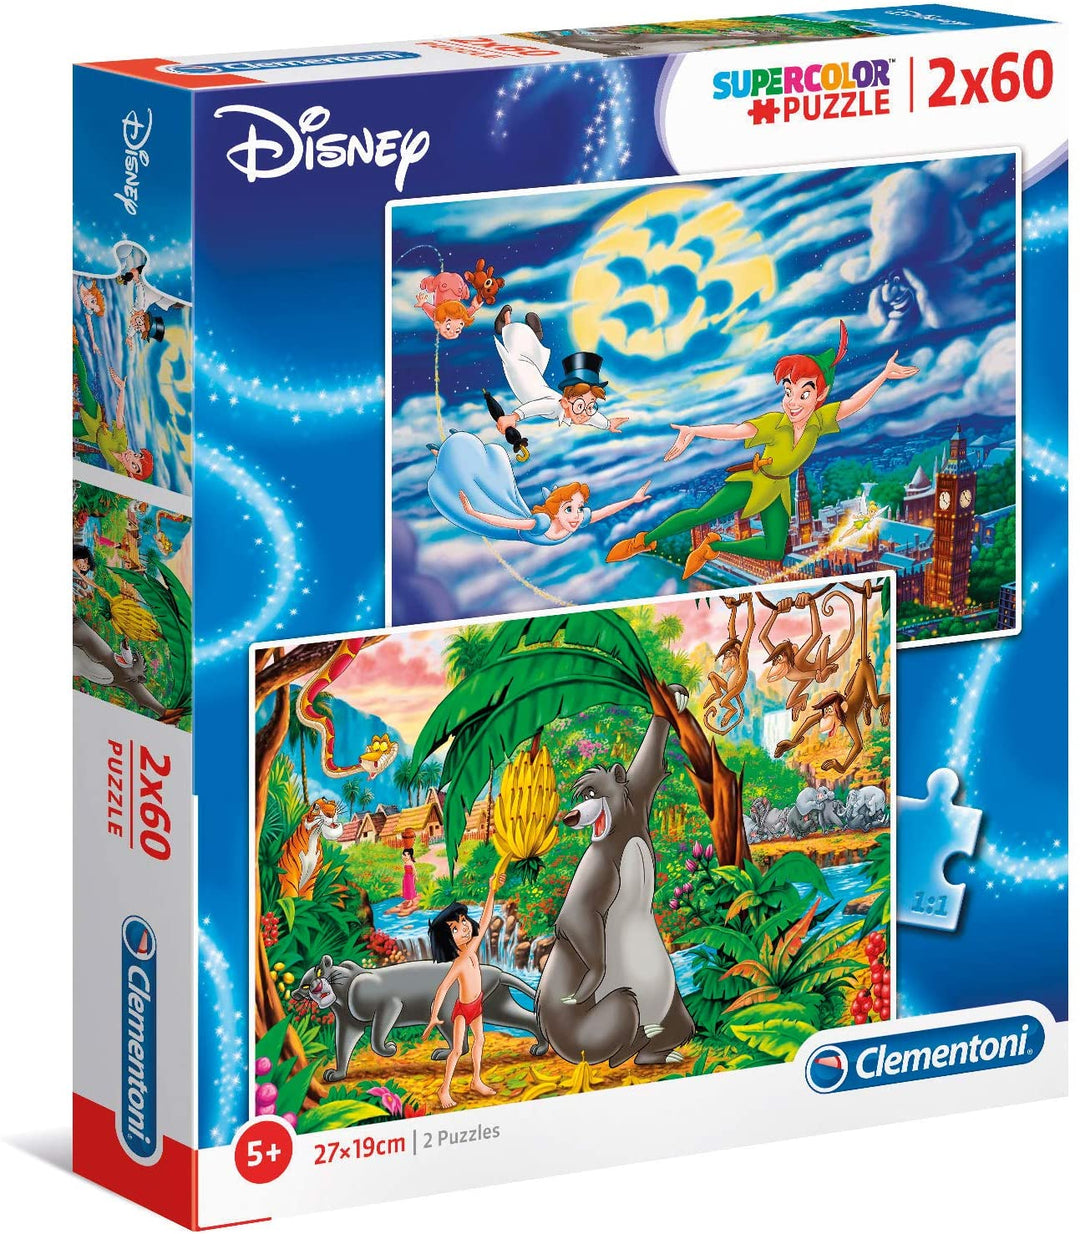 Clementoni - 21613 - Supercolor Puzzle - Disney Peter Pan + Jungle Book - 2x60 pieces - Made in Italy - jigsaw puzzle children age 5+